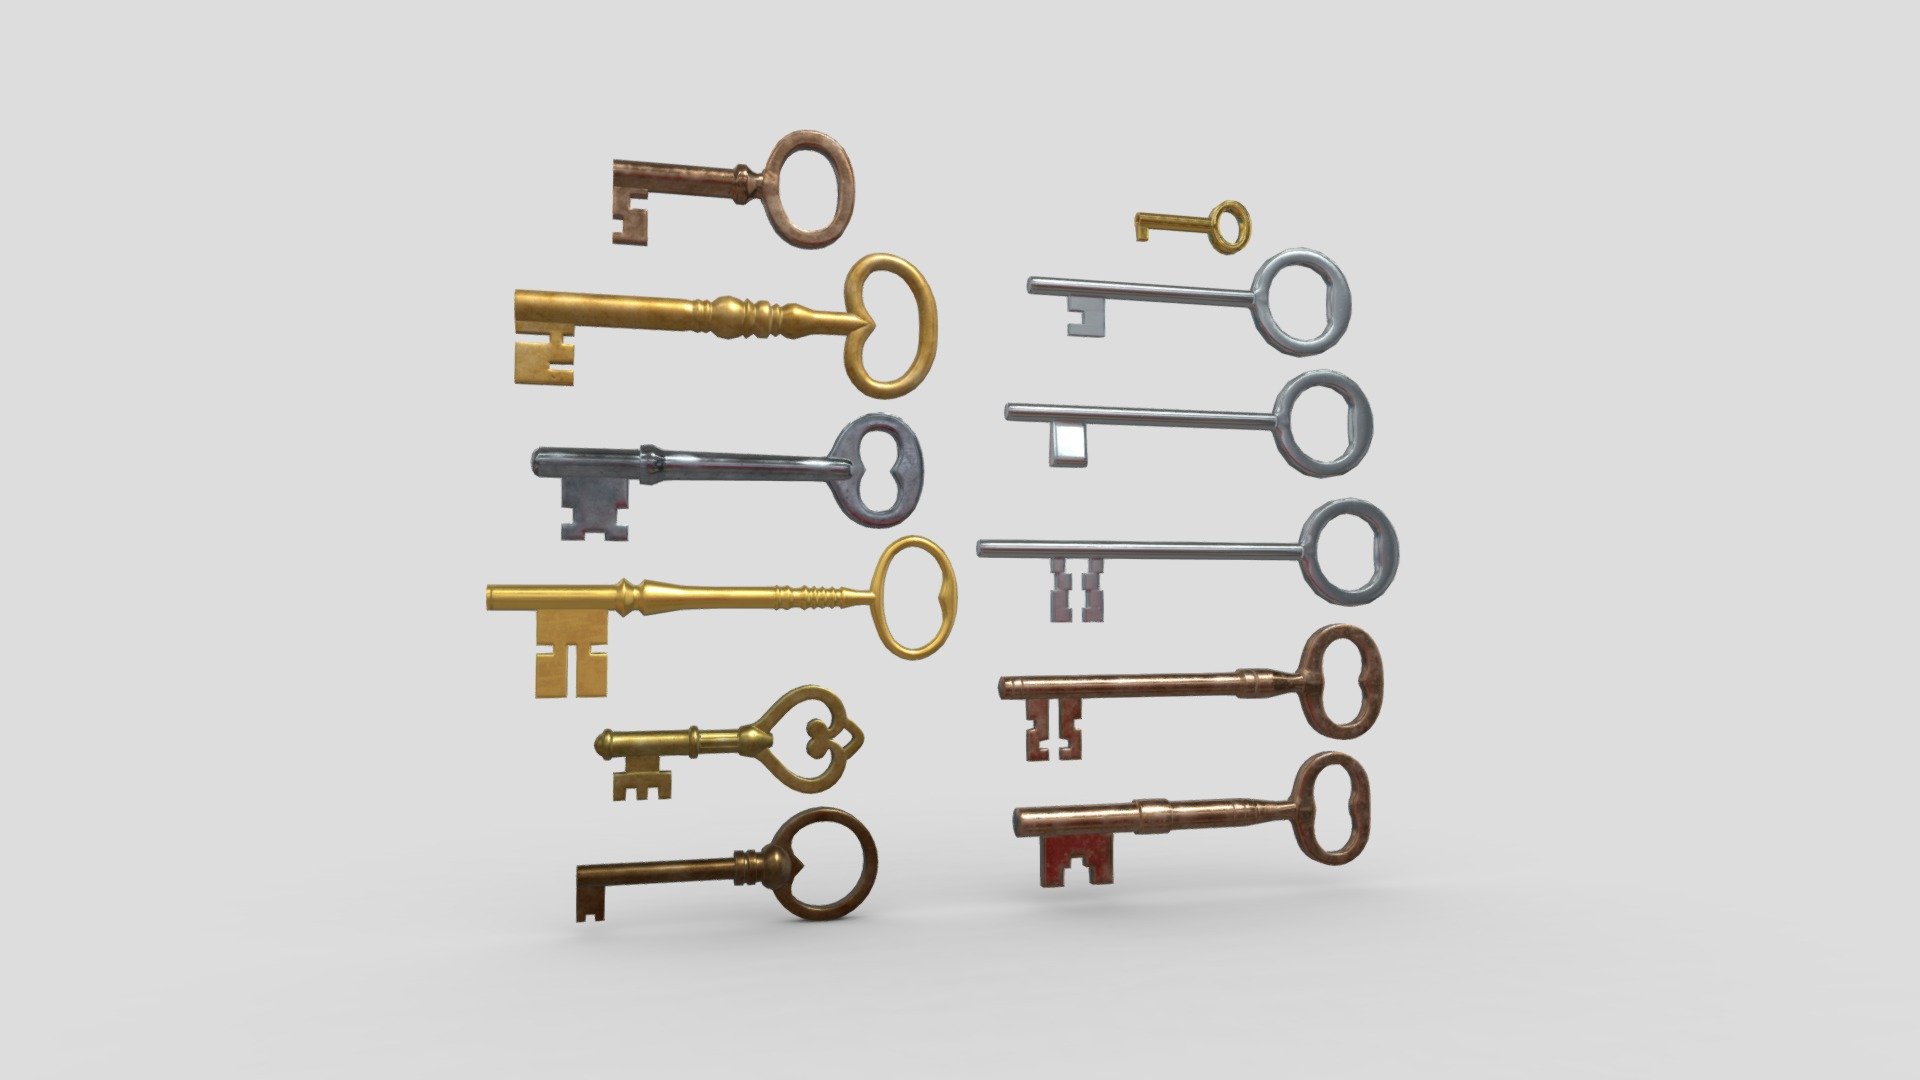 ‘All the keys all that treasures - be sure to try everyone of them!’

● 2048 x 2048 PBR textures

● normal map is baked from the high poly model.

If you need help with this model or have a question – please do not hesitate to contact me. I will be happy to help you.

Contact: plaggy.net@gmail.com

Formats: .fbx, .dae, .max, .obj, .mtl, .png Polygon: 4795 Vertices: 4930 Textures: Yes, PBR (ao, albedo, metal, normal, rough) Materials: Yes UV Mapped: Yes Unwrapped UVs: Yes (non overlapping) - Key Pack - Buy Royalty Free 3D model by plaggy 3d model